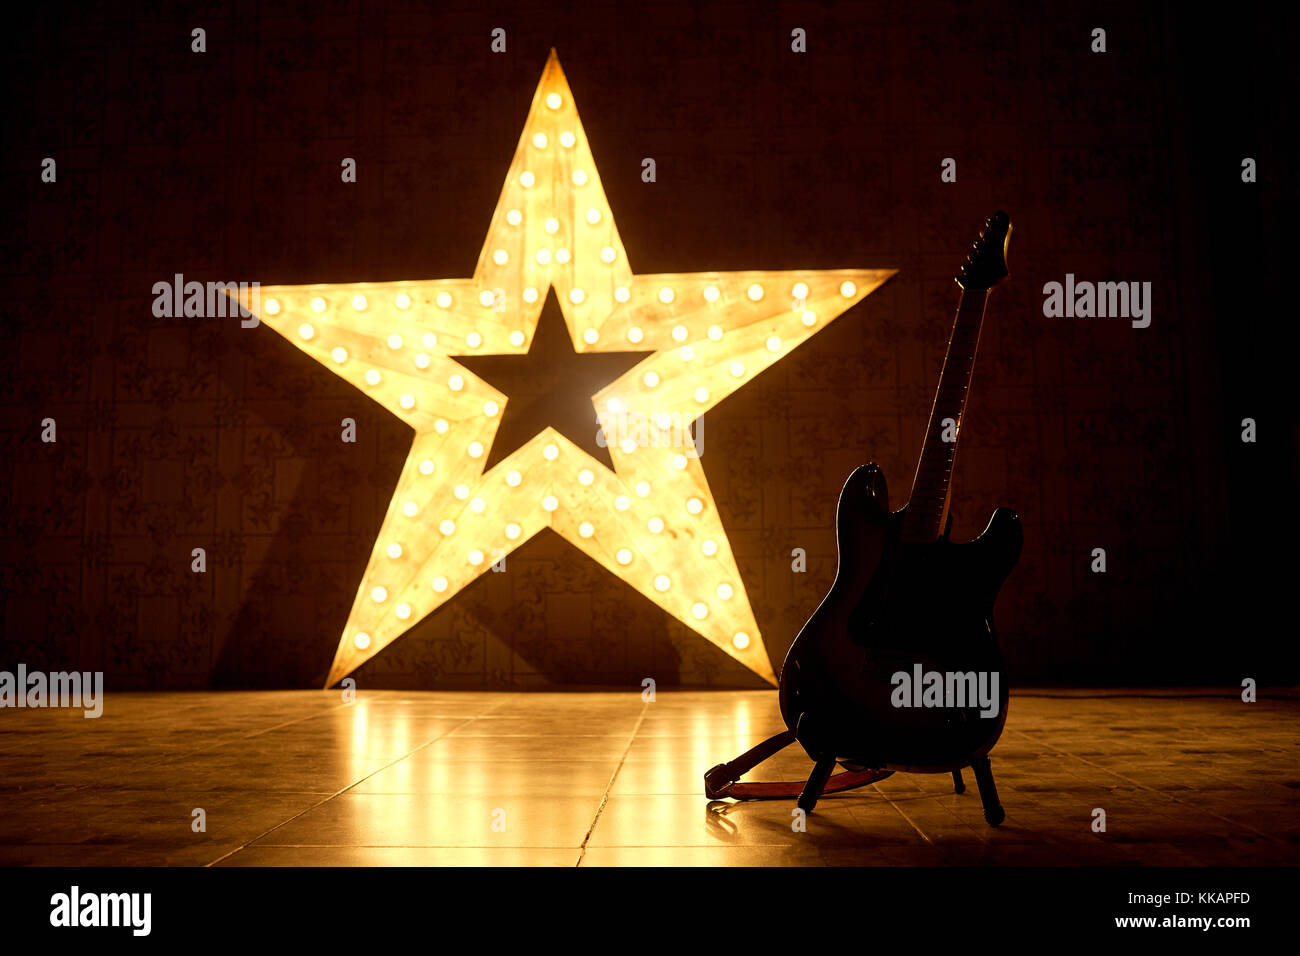 An electric guitar on the background of a large electric star. Stock Photo